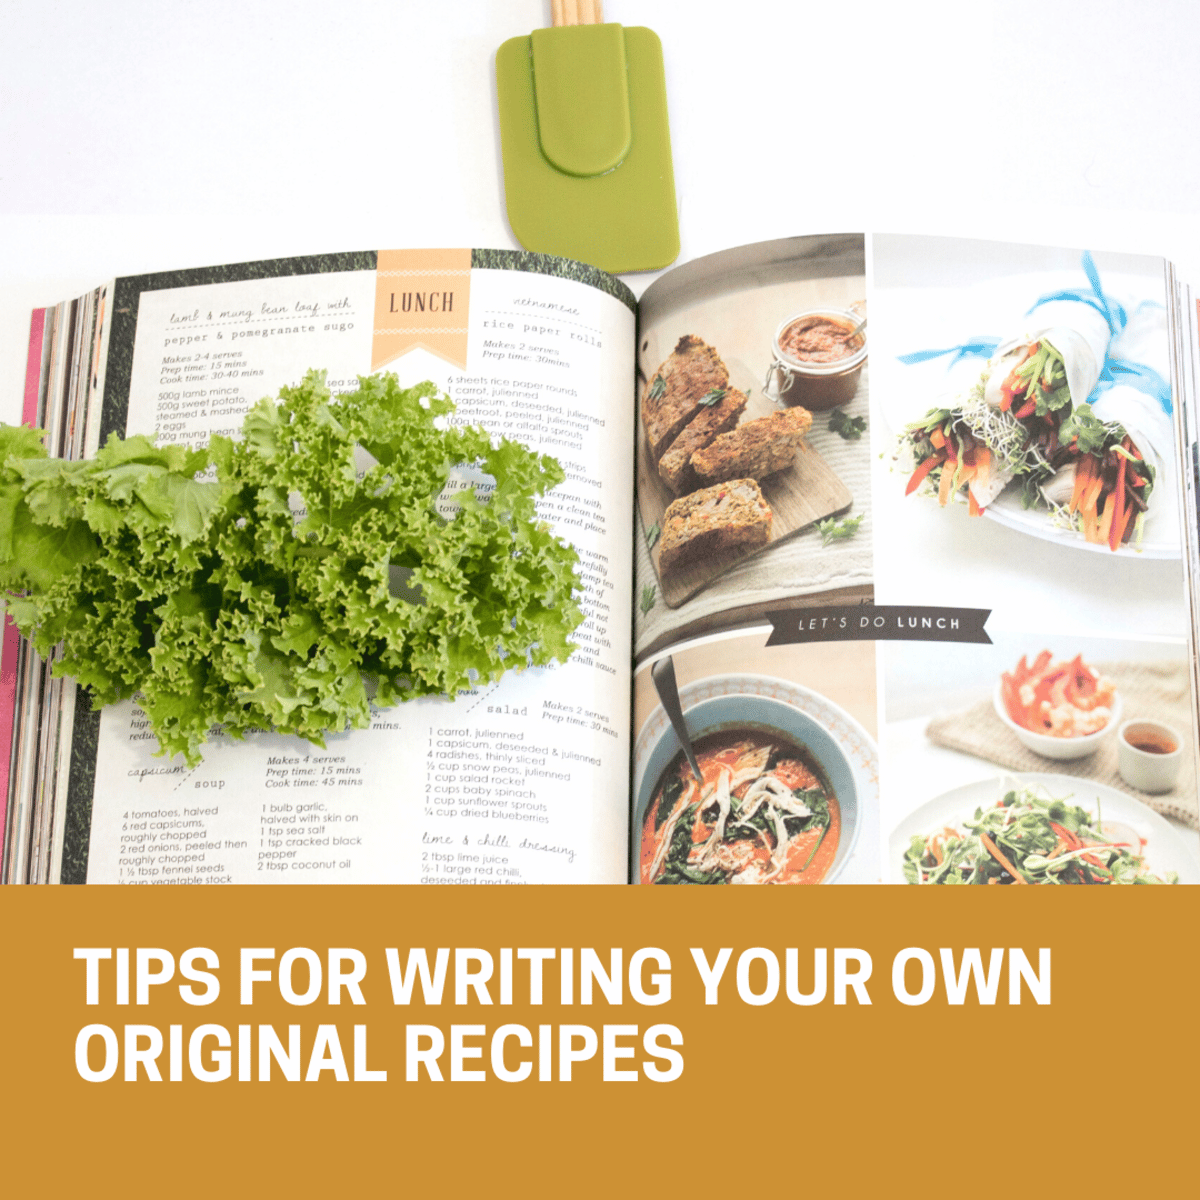 10 Tips for Writing Your Own Original Recipes